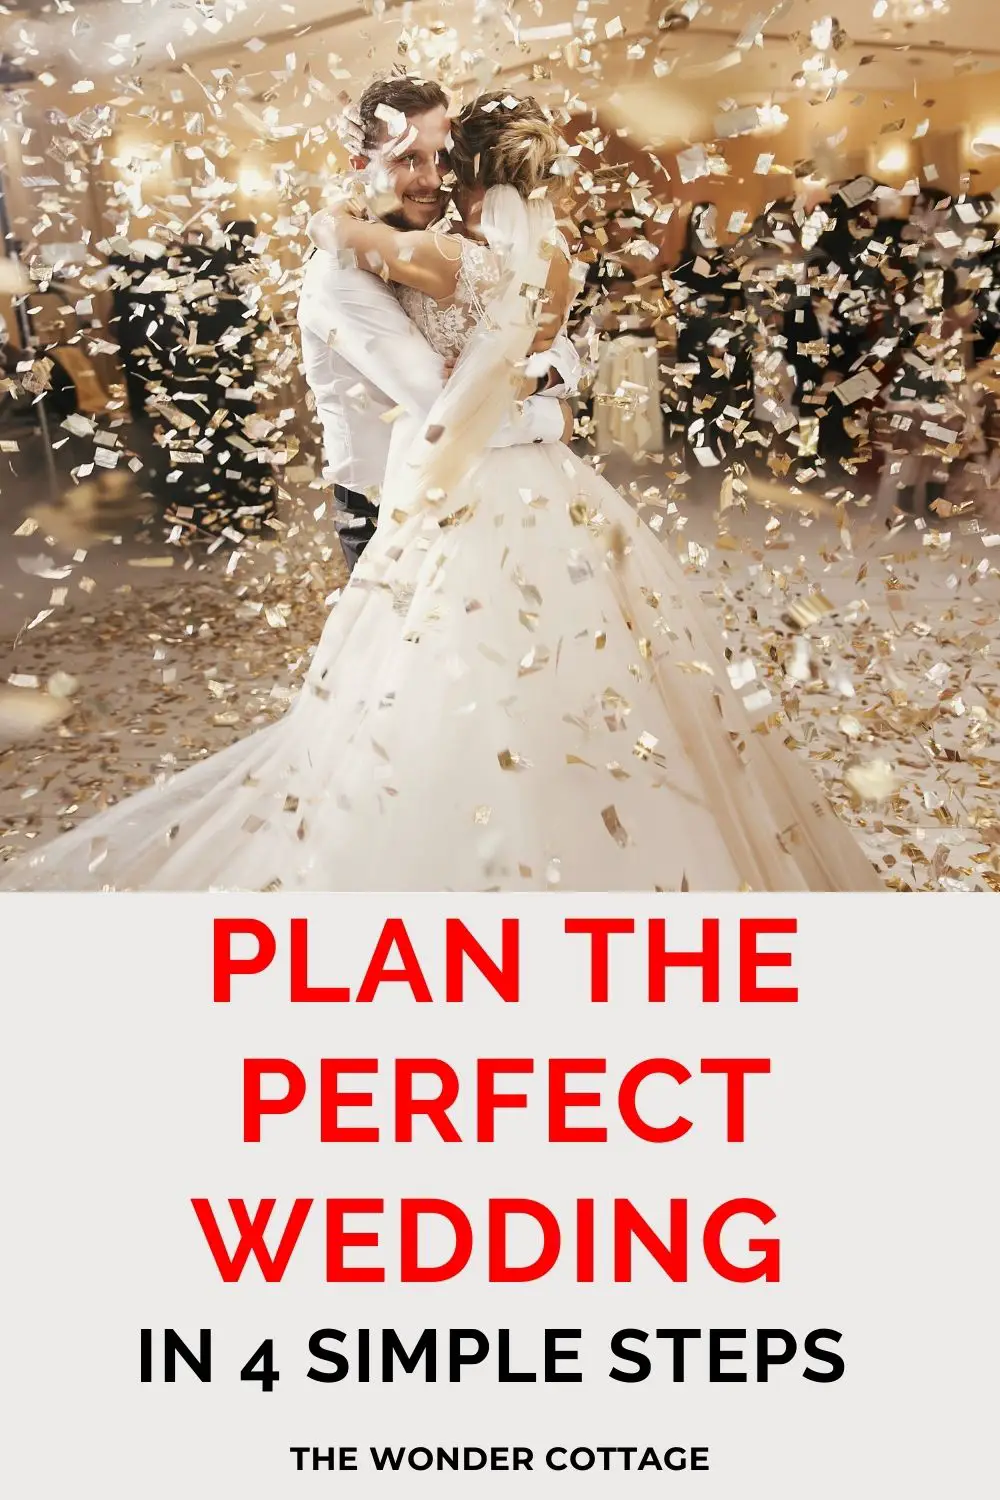 Plan the perfect wedding in 4 simple steps